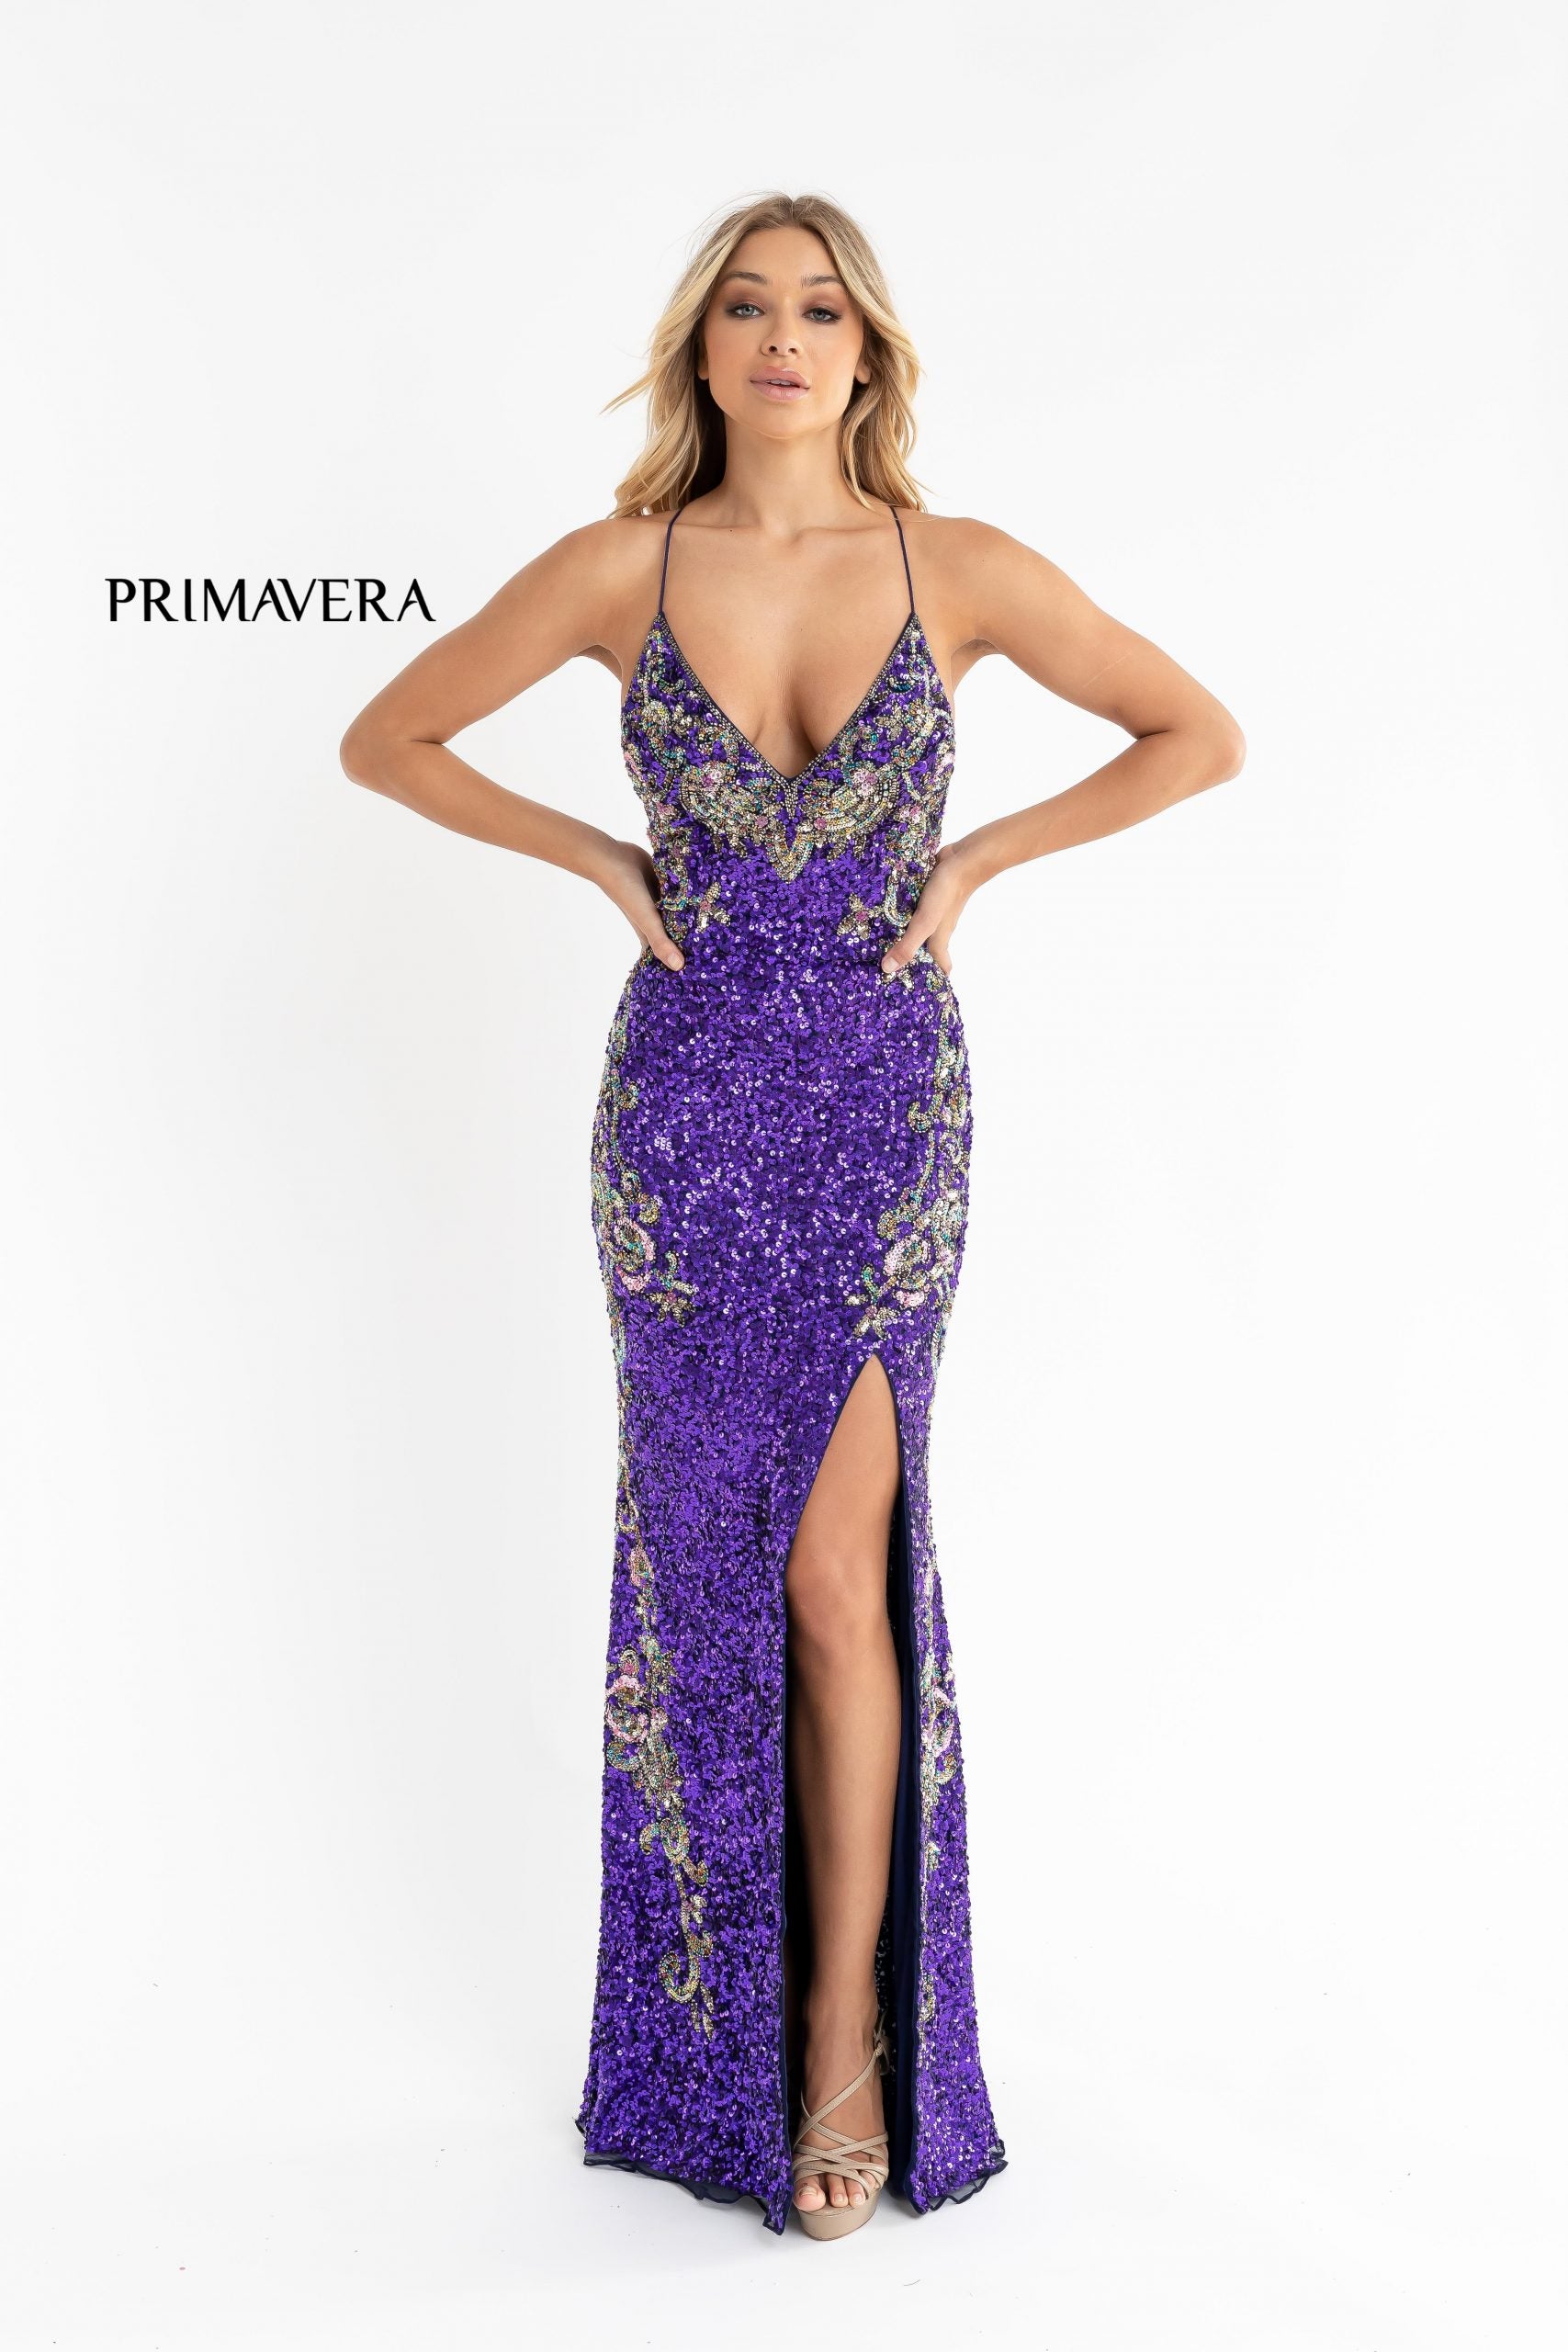 Primavera Couture 3211 Purple is a Long fitted sequin Embellished Formal Evening Gown. This Prom Dress Features a deep V Neck with an open Corset lace up back. Beaded & embellished elegant scroll pattern accentuate curves. Fully beaded prom dress with floral pattern and side slit. Long Sequin Gown featuring a v neckline. slit in the fitted skirt, Slit in Thigh. Stunning Pageant Dress, Prom Gown & More! front